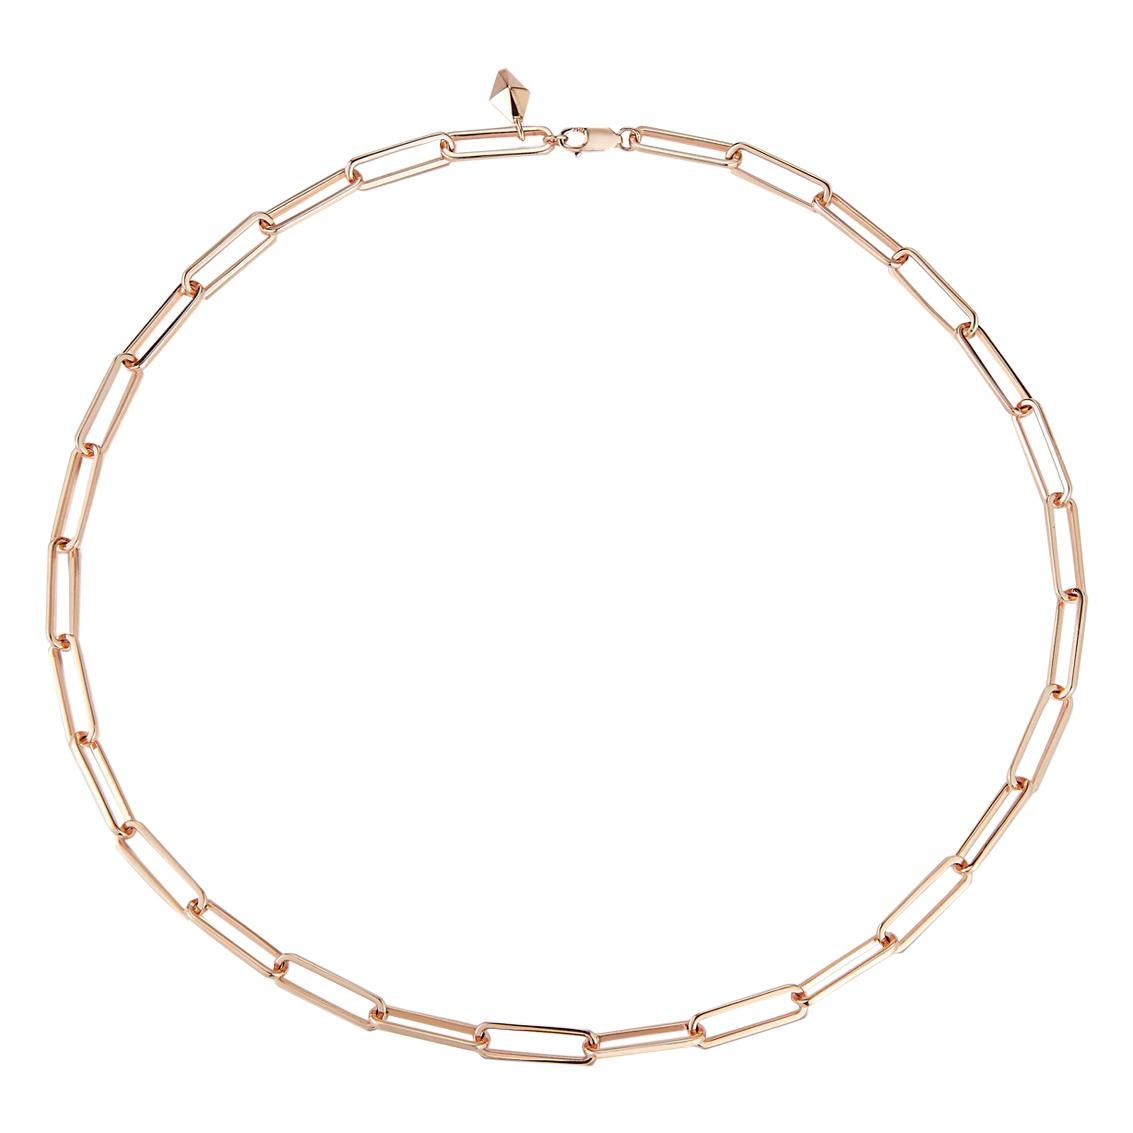 Walters Faith 18 Karat Rose Gold Chain Necklace with Origami Hang Tag